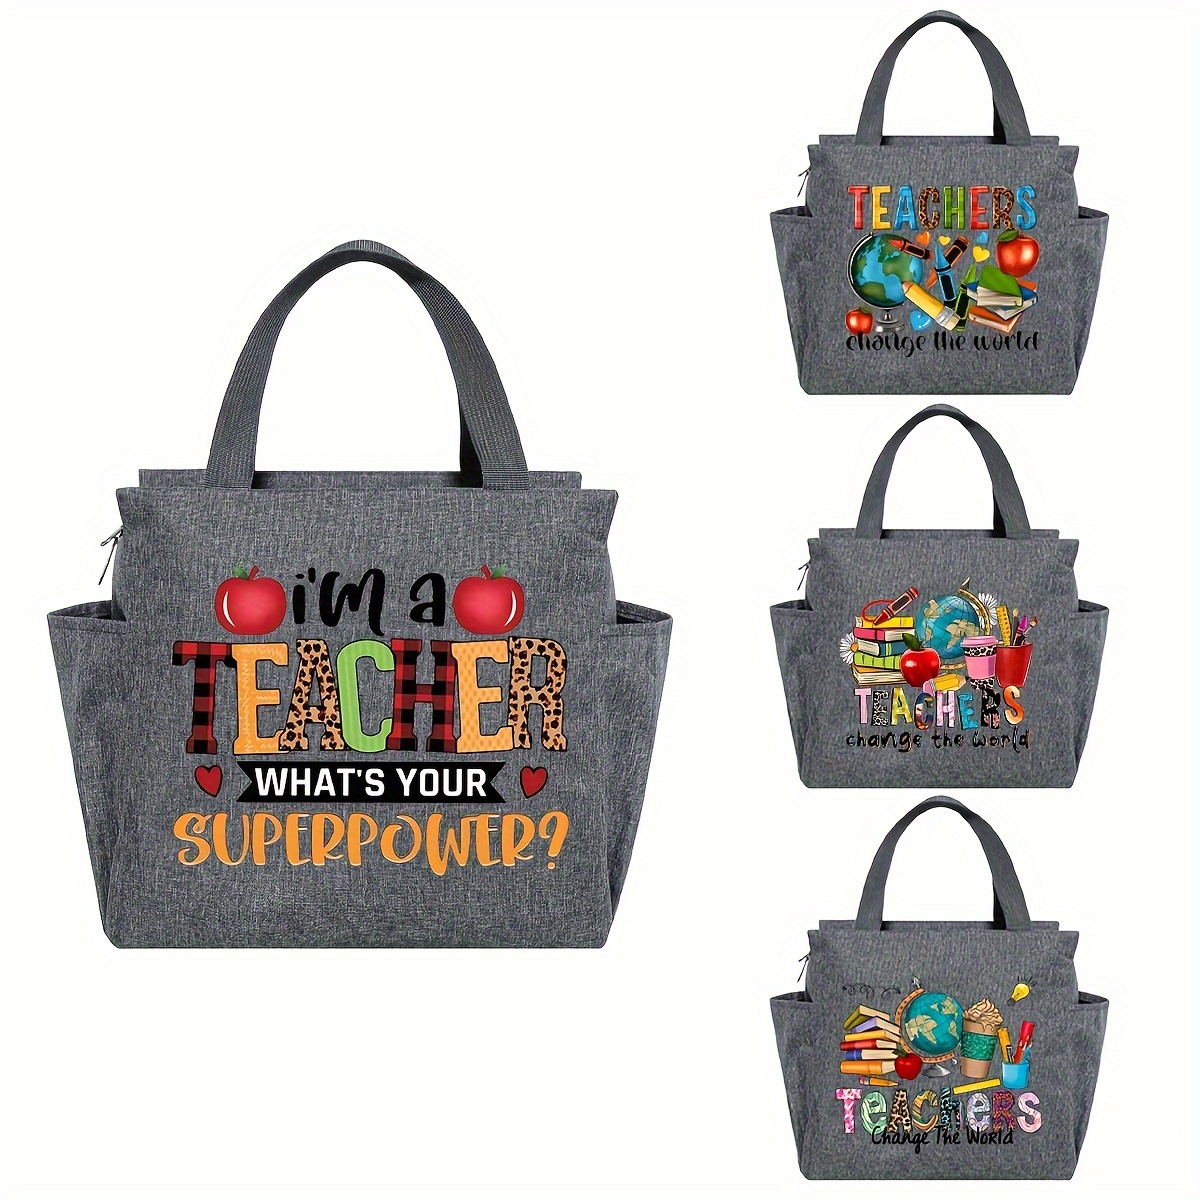 

Oxford Cloth Insulated Lunch Bag With Teacher Print, Square Hand Washable Portable Thickened Aluminum Foil Handbag For Office, School, And Travel - Perfect Teacher Gift.